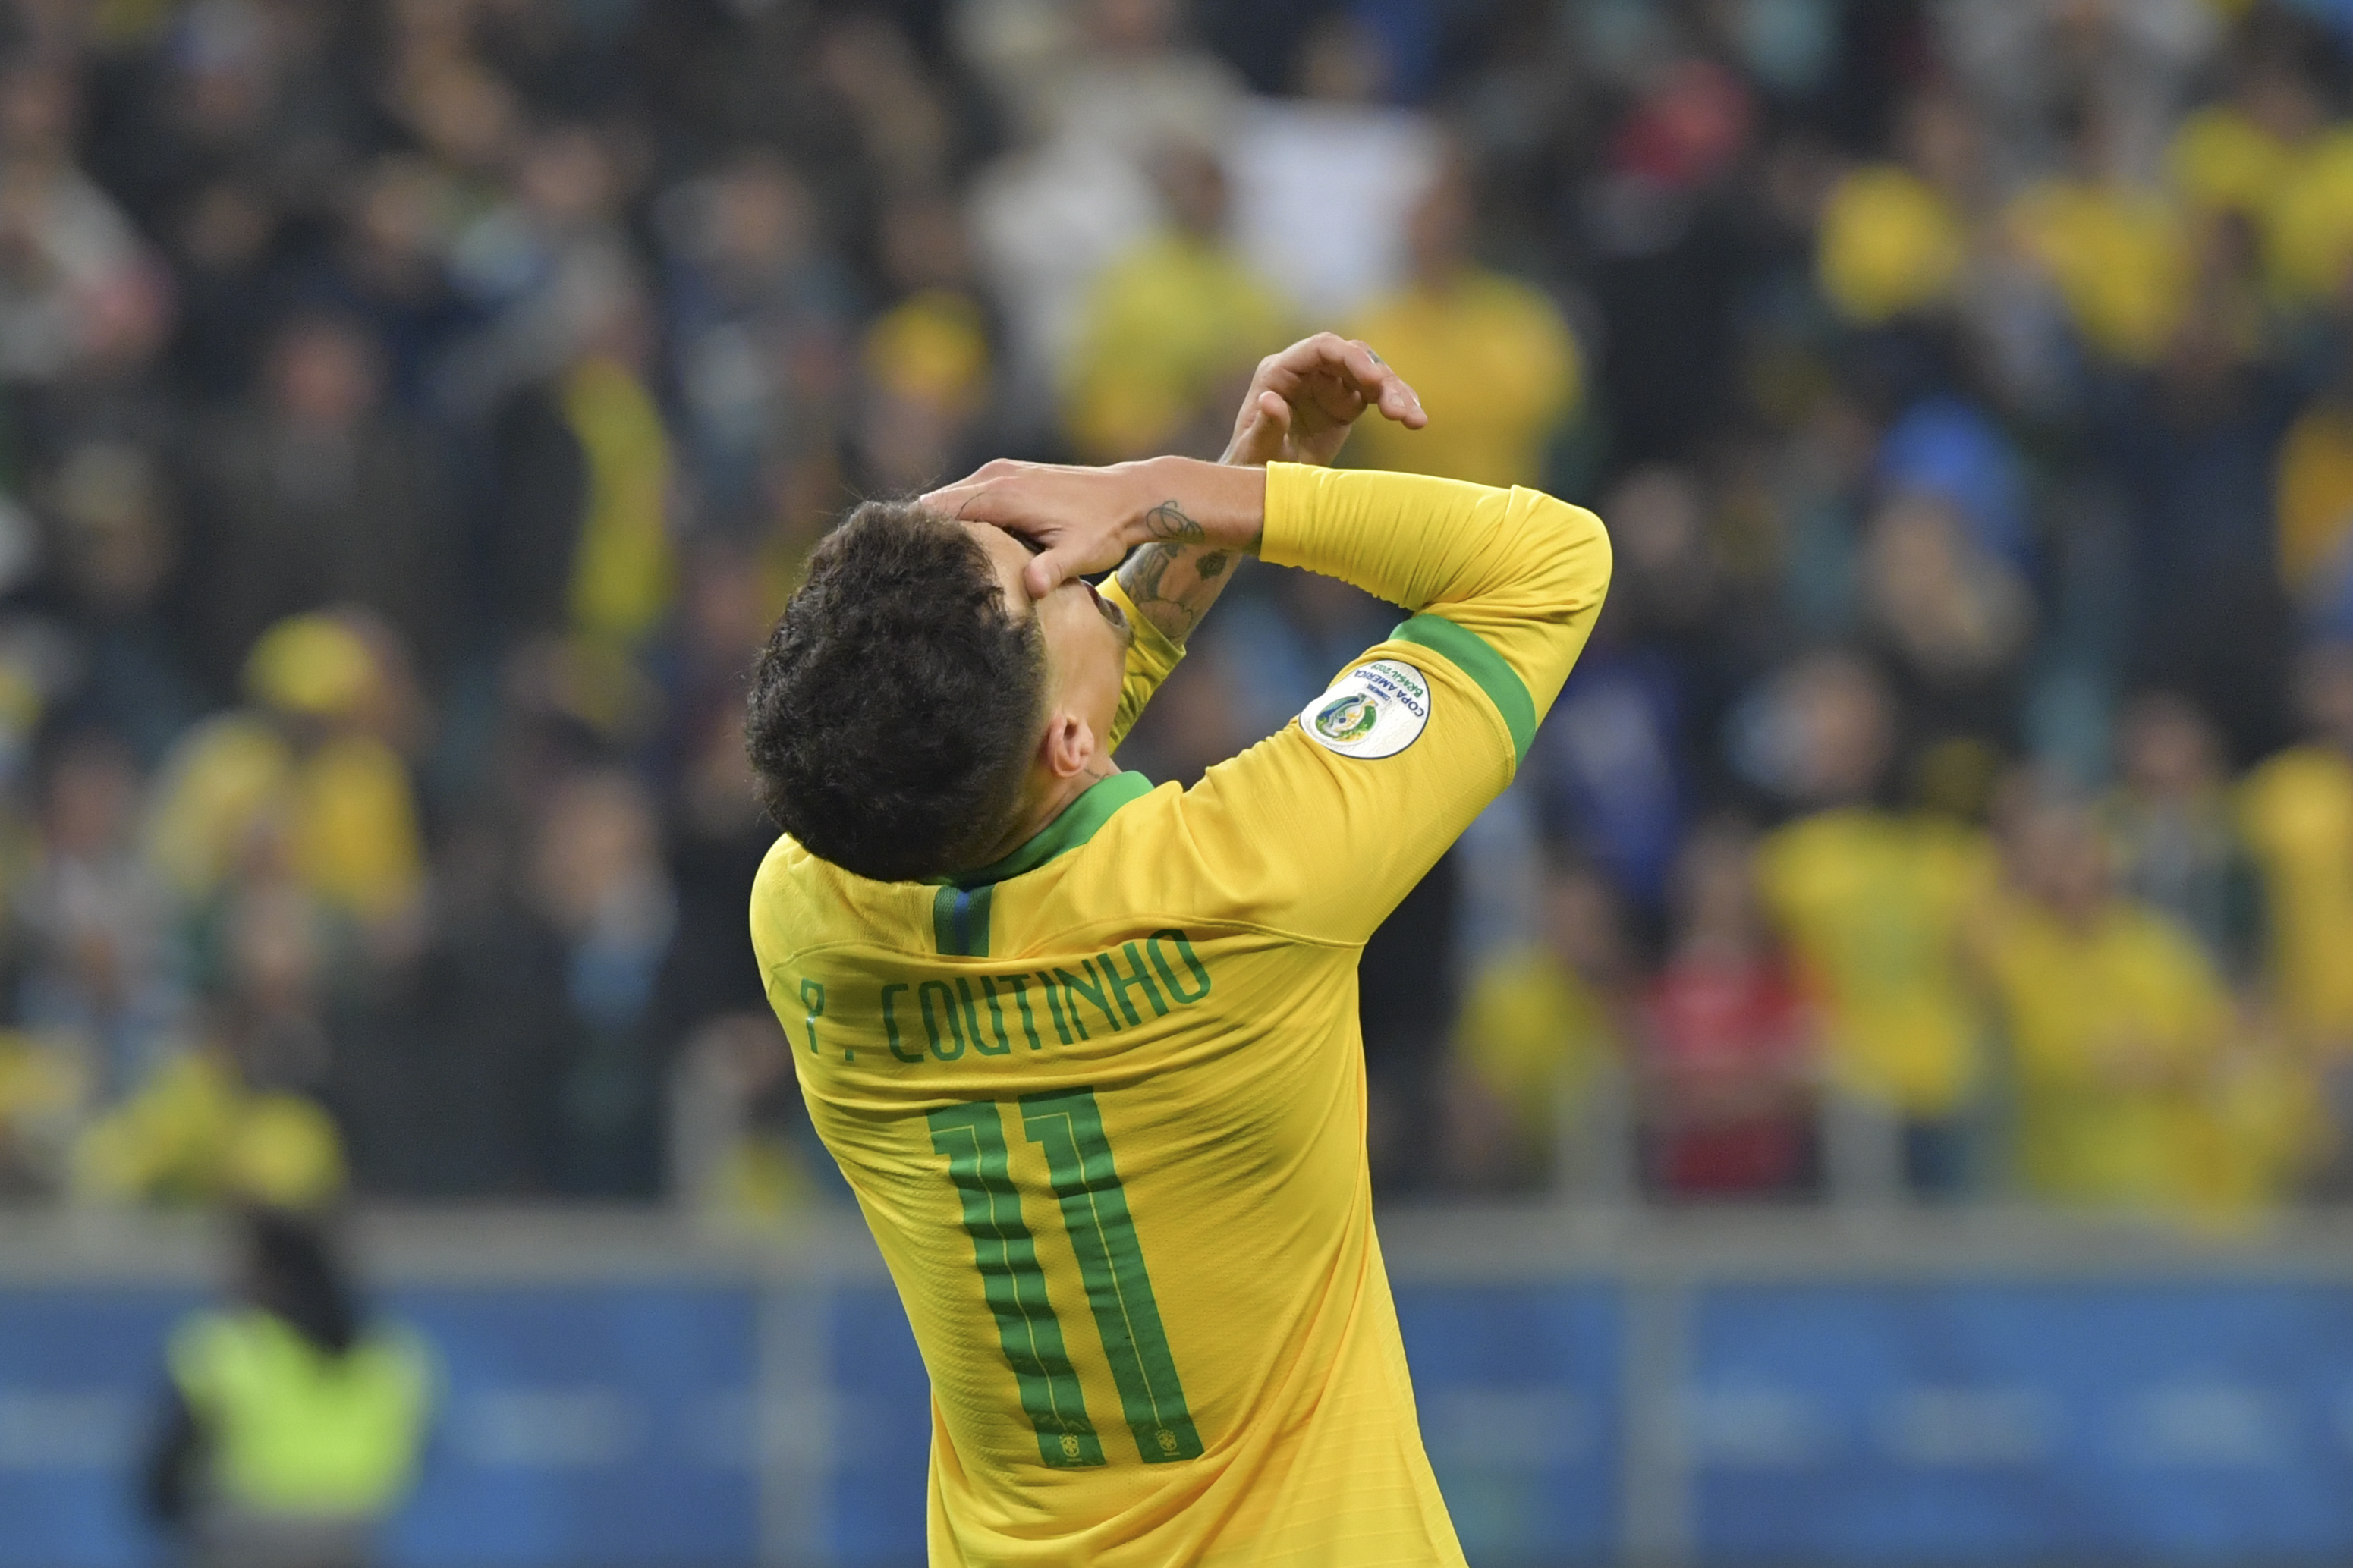 Brazil's Philippe Coutinho gestures after tying with Paraguay 0-0 and going the the penalty shoot-out during their Copa America football tournament quarter-final match at the Gremio Arena in Porto Alegre, Brazil, on June 27, 2019. (Photo by Luis ACOSTA / AFP)        (Photo credit should read LUIS ACOSTA/AFP/Getty Images)